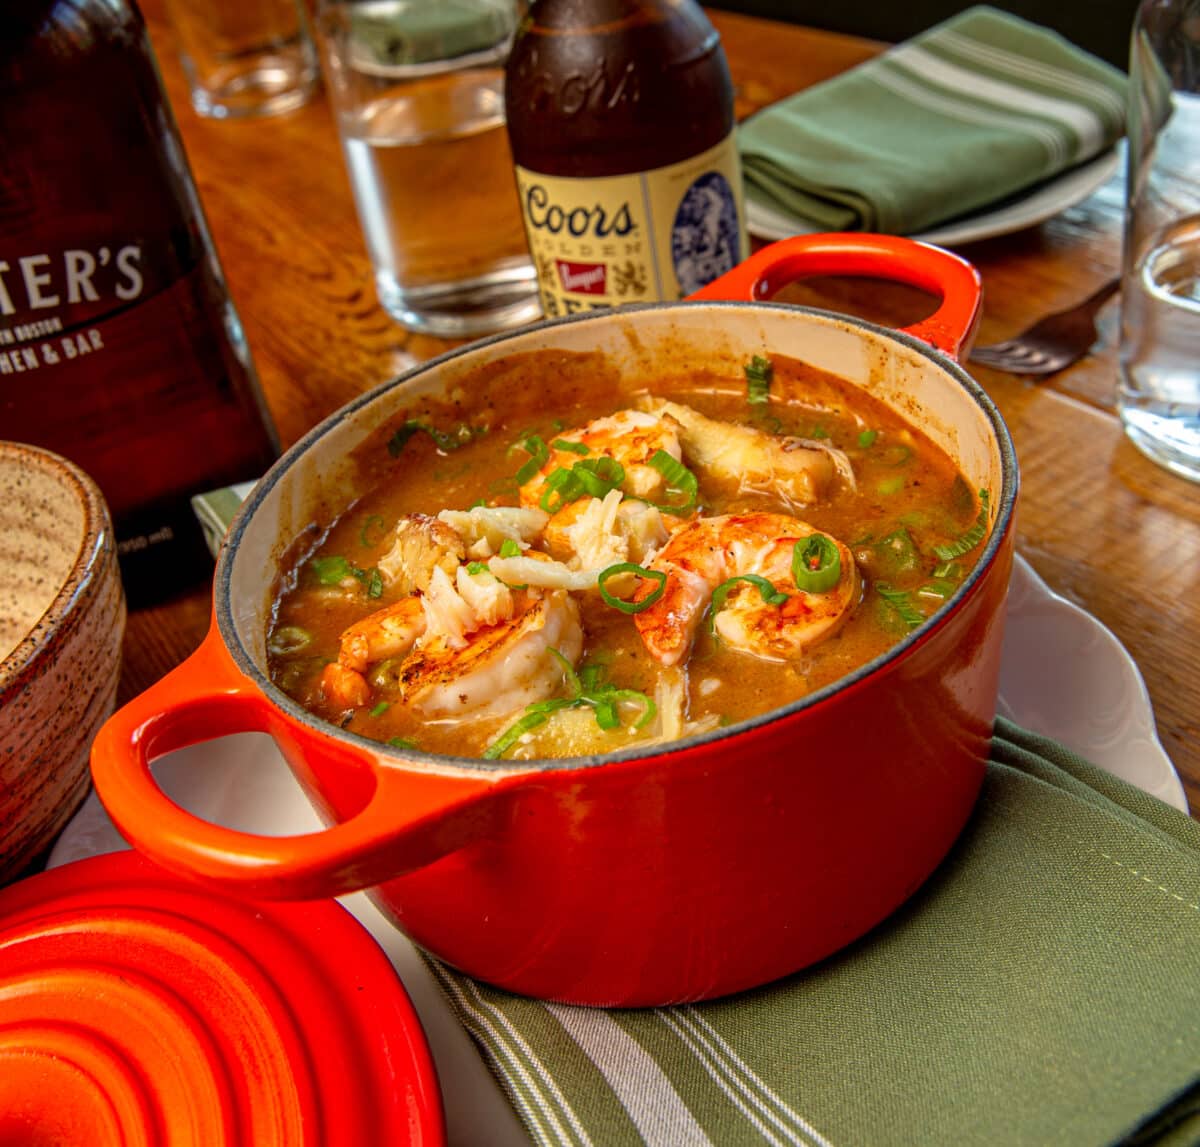 Chef Lambo's gumbo served at Hunter's Kitchen & Bar in South Boston